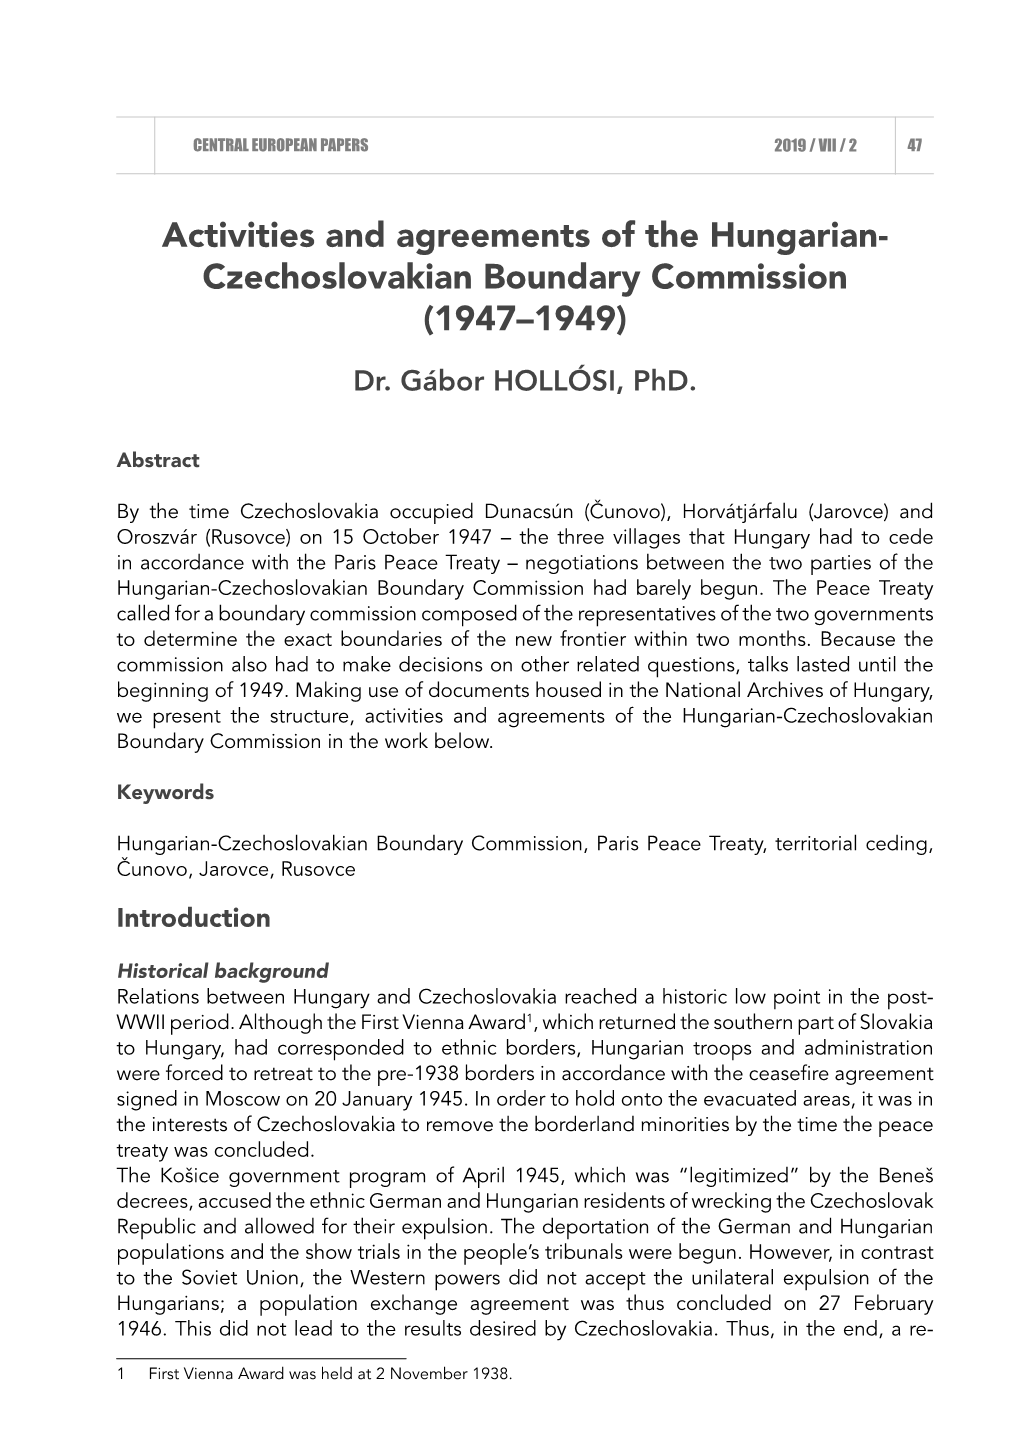 Activities and Agreements of the Hungarian-Czechoslovakian Boundary Commission in the Work Below